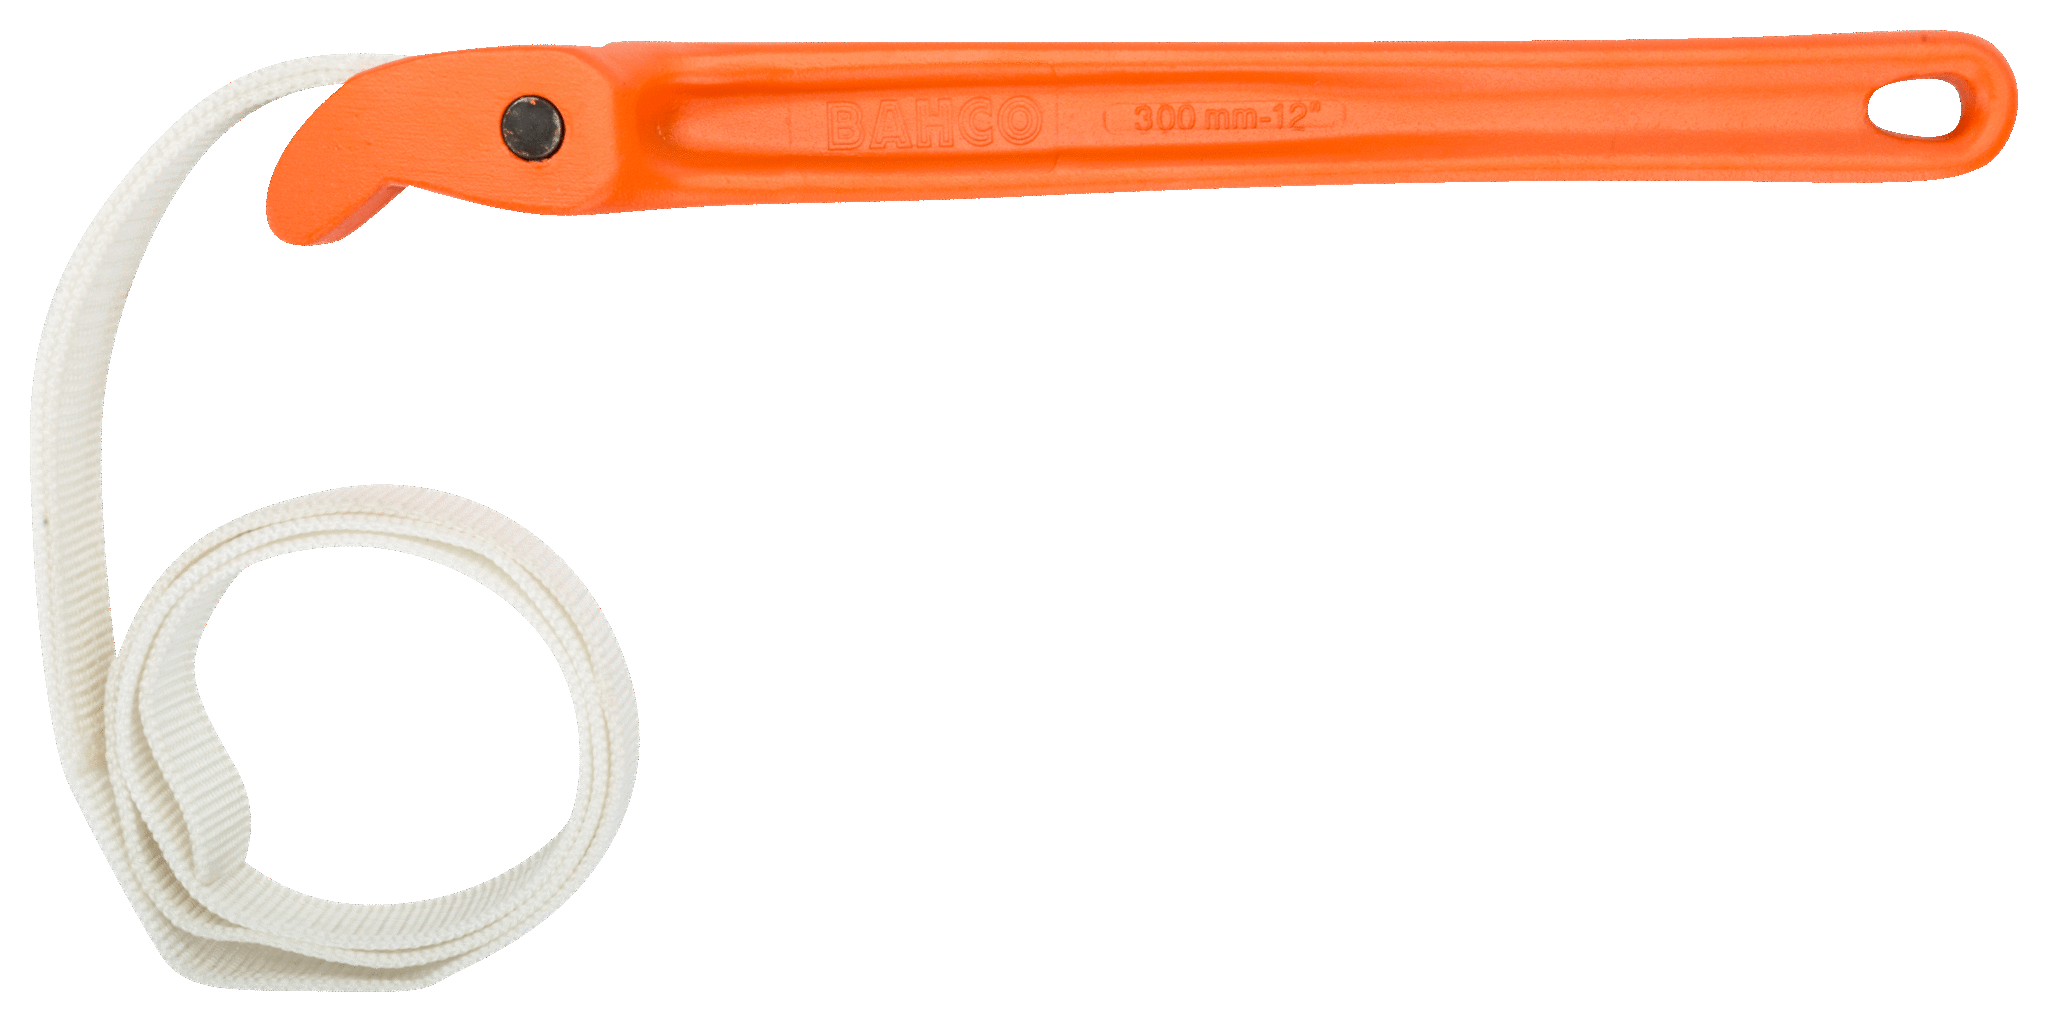 Special Pipe Wrenches with Nylon Strap and Steel Handle - 375-8 by Bahco